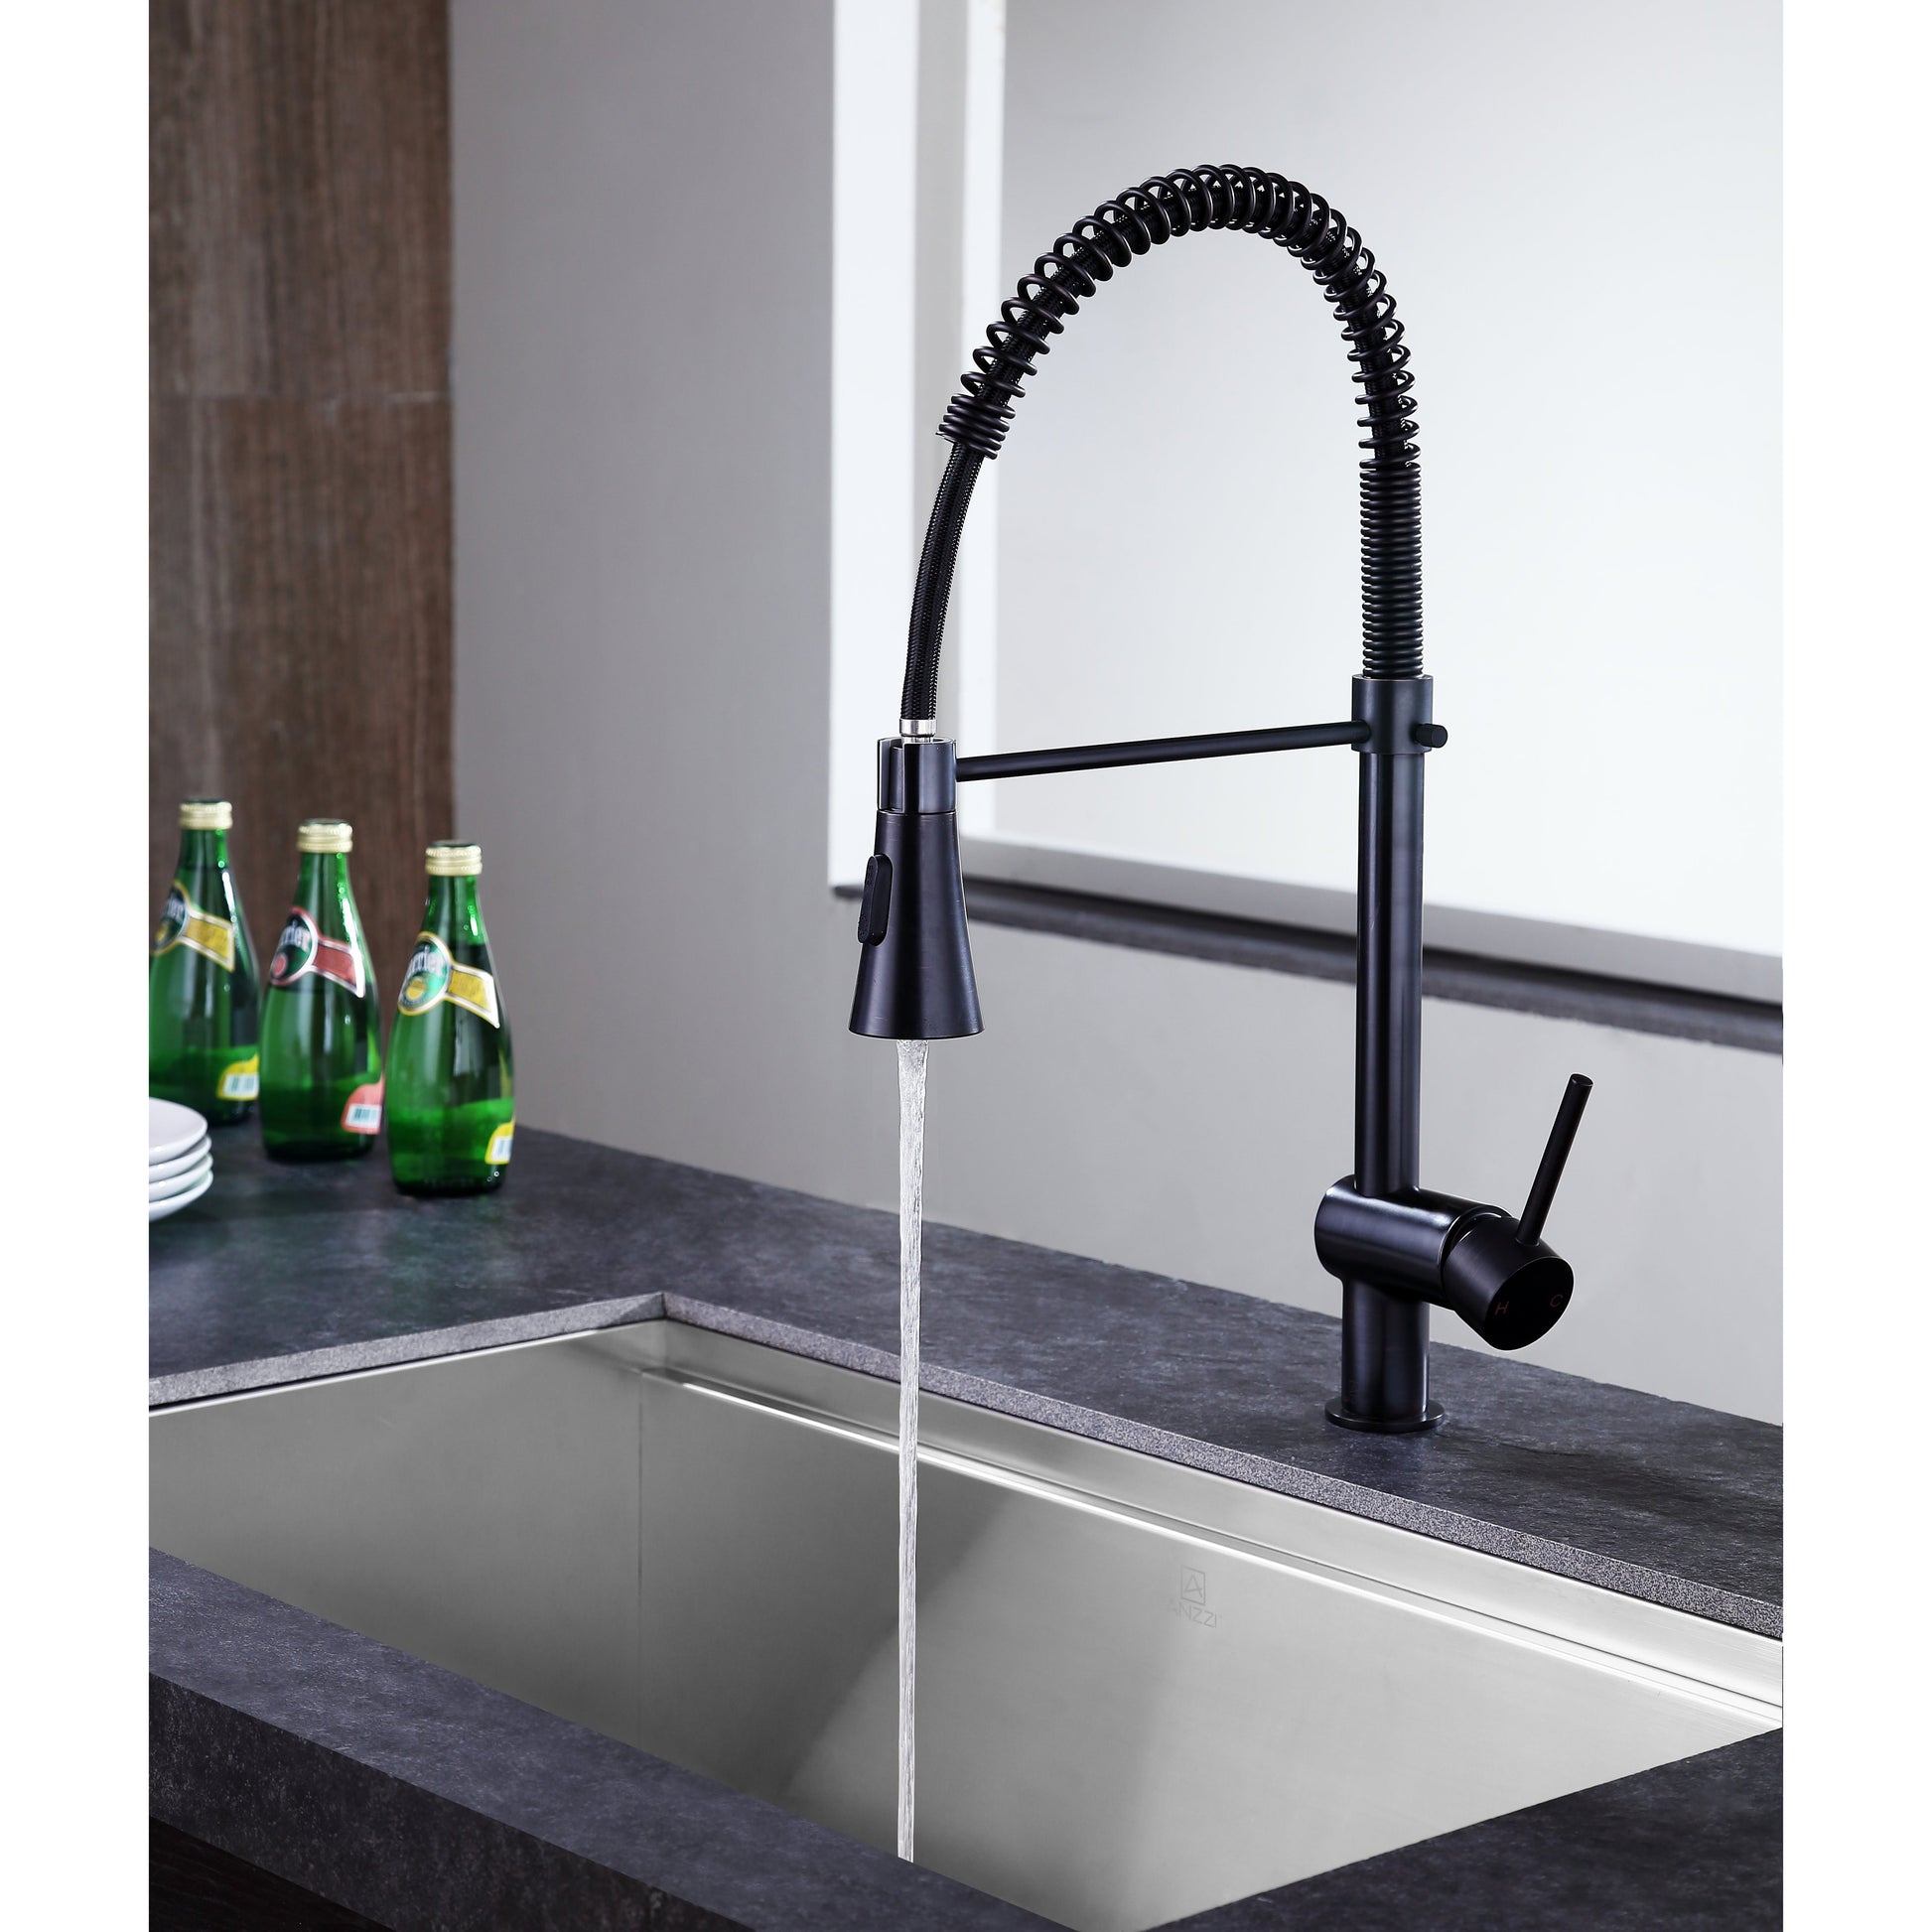 ANZZI Carriage Series Single Hole Oil Rubbed Bronze Kitchen Faucet With Euro-Grip Pull Down Sprayer